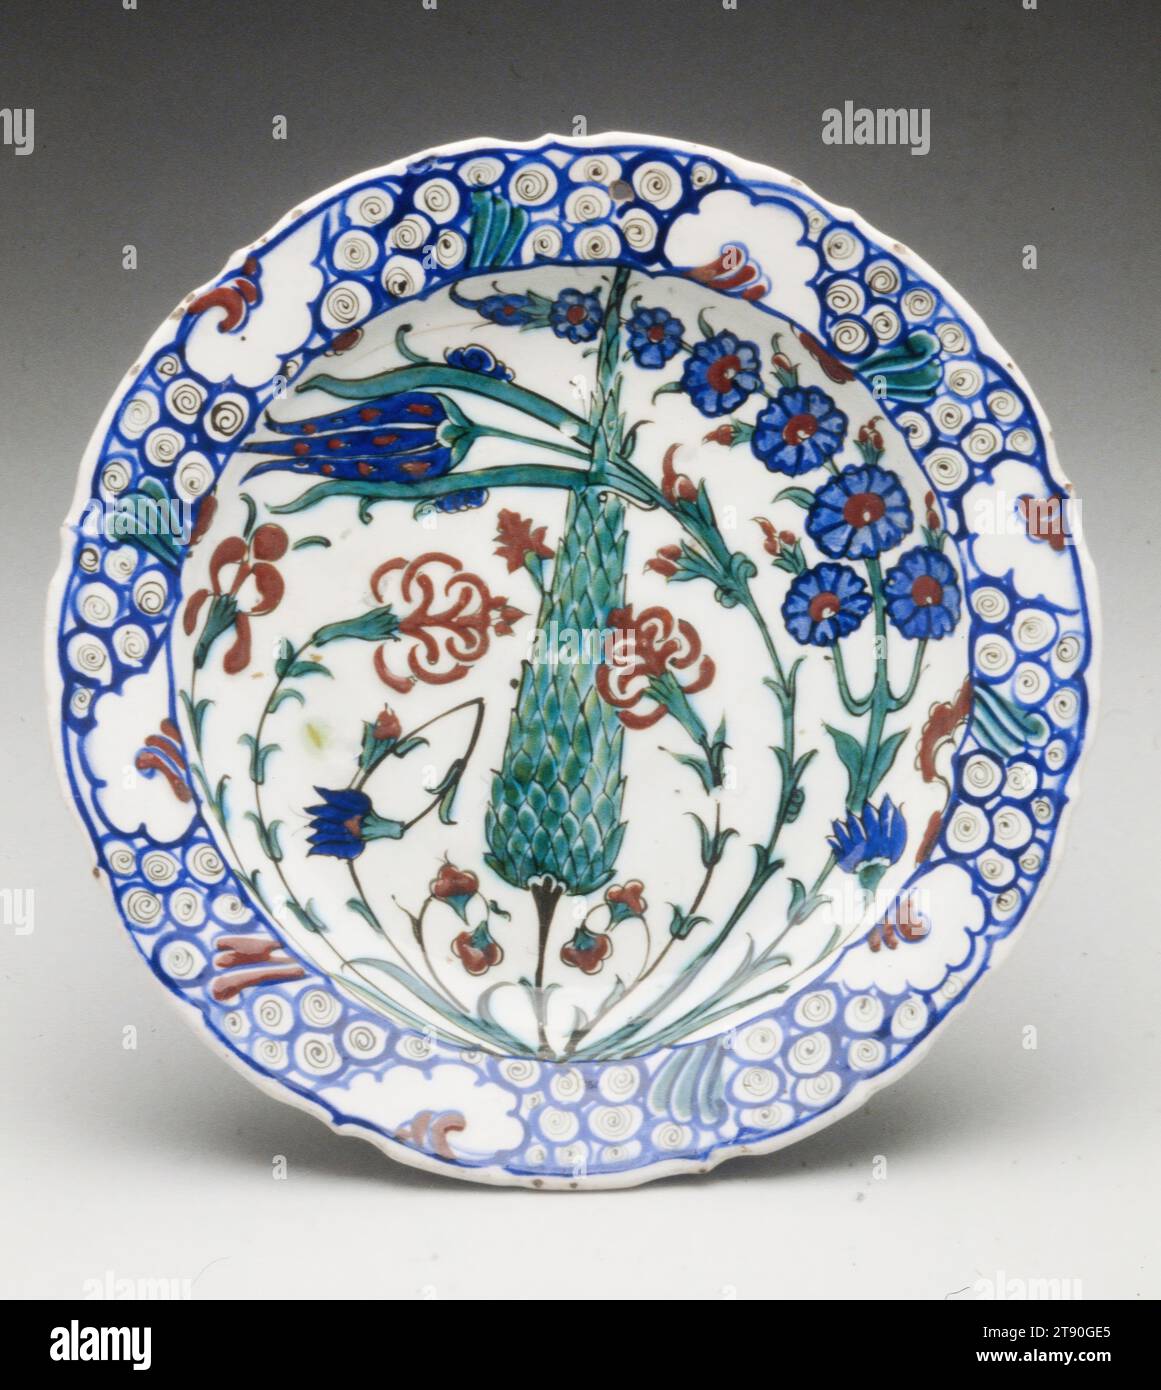 Plate, 16th century, 11 3/8 in. (28.89 cm), Iznik ware Slip-coated earthenware with blue, red and green pigments under a clear glaze,, Turkey, 16th century, This brilliant plate exemplifies the Ottomans' successful attempt at polychromy, in which a clear white body (tin-glazed earthenware) forms the ground for bright blue, green, and red underglaze motifs. The foliate rim is decorated in a stylized wave pattern ultimately based on a Chinese prototype. Because Ottoman sultans amassed large collections of Chinese ceramics, imported wares naturally influenced local production. Stock Photo